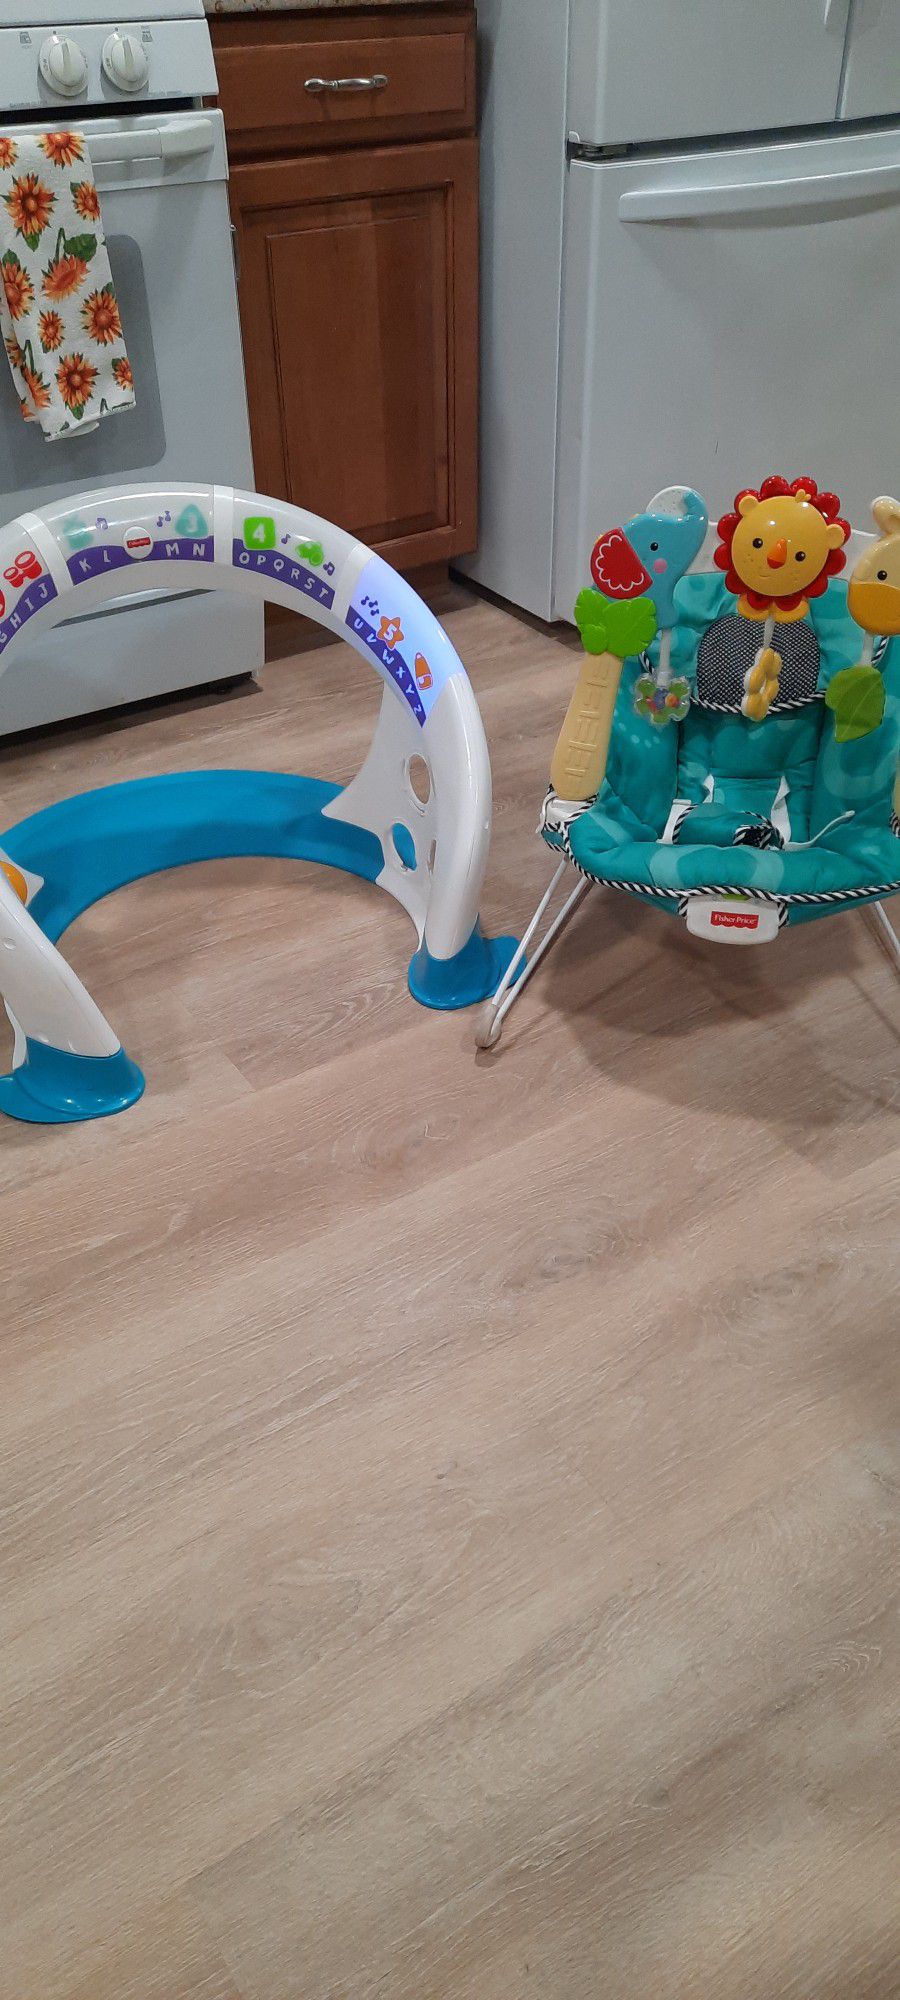 Bouncy Seat And Floor Toy